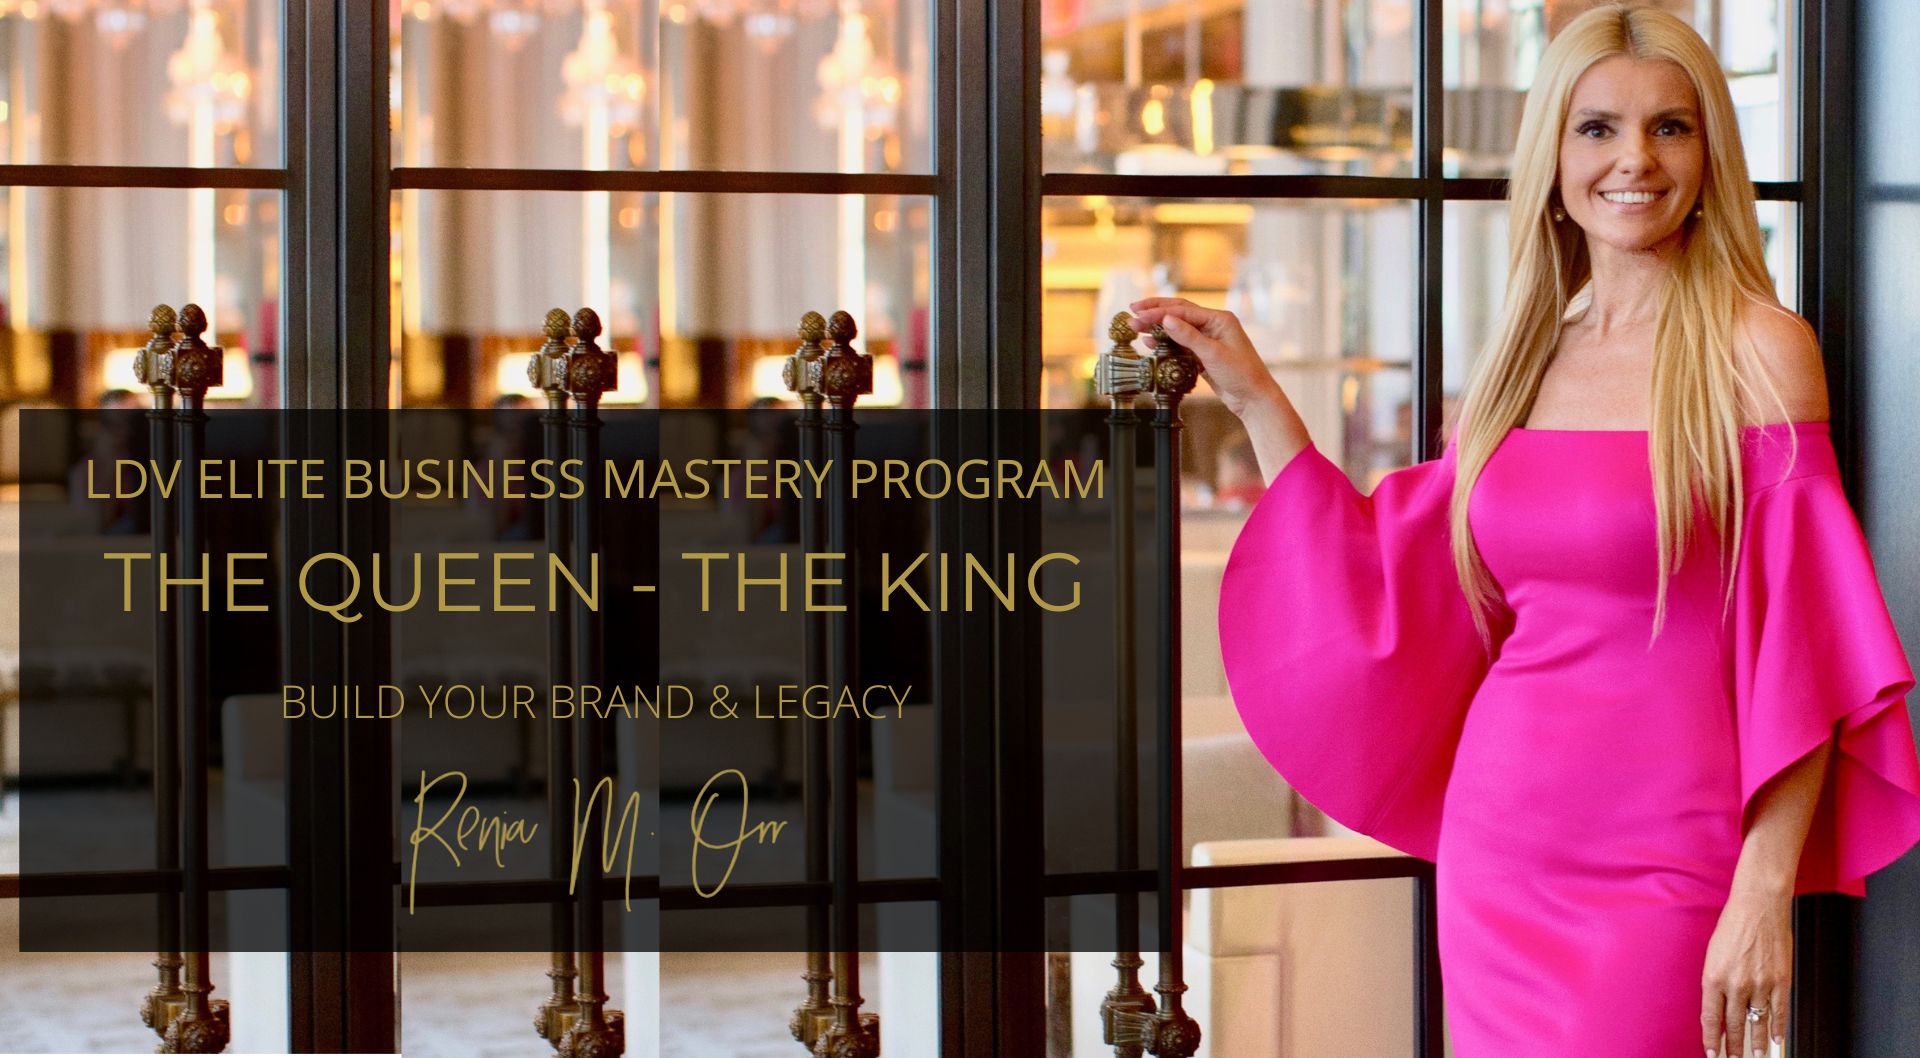 Busines Mastery Program - The Queen - The King